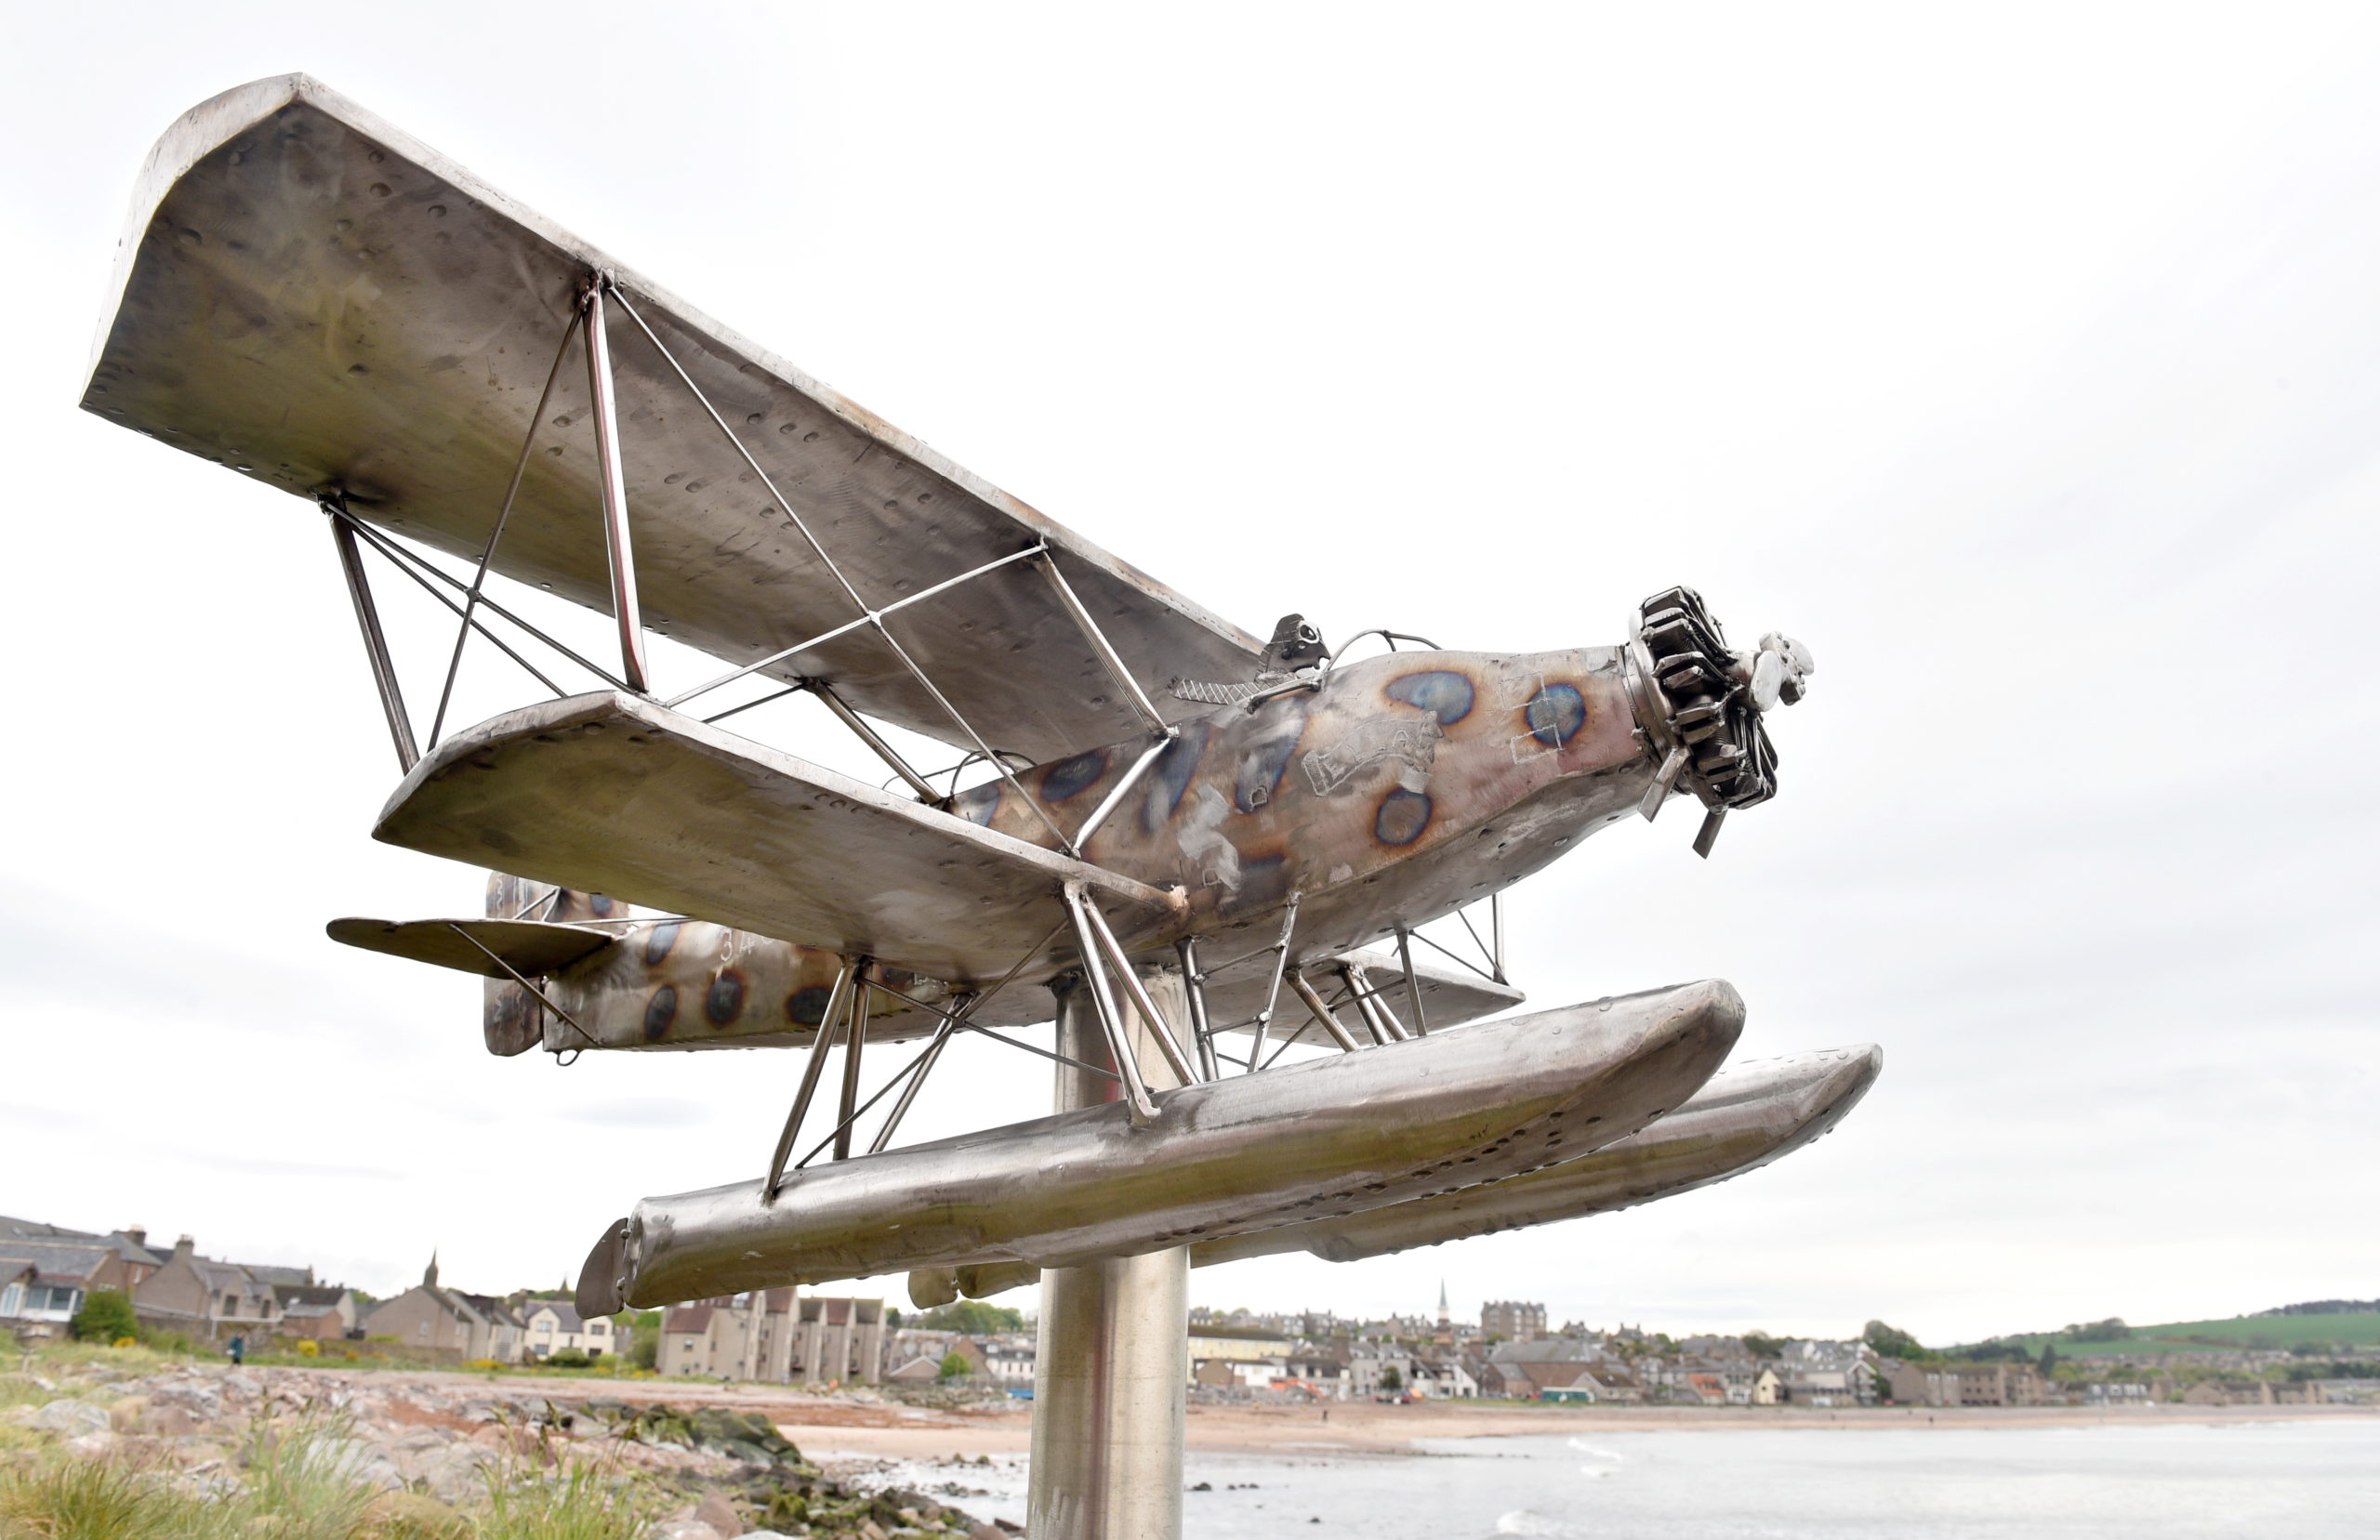 The wartime biplane that provided the inspiration for Stonehaven's latest sculpture.